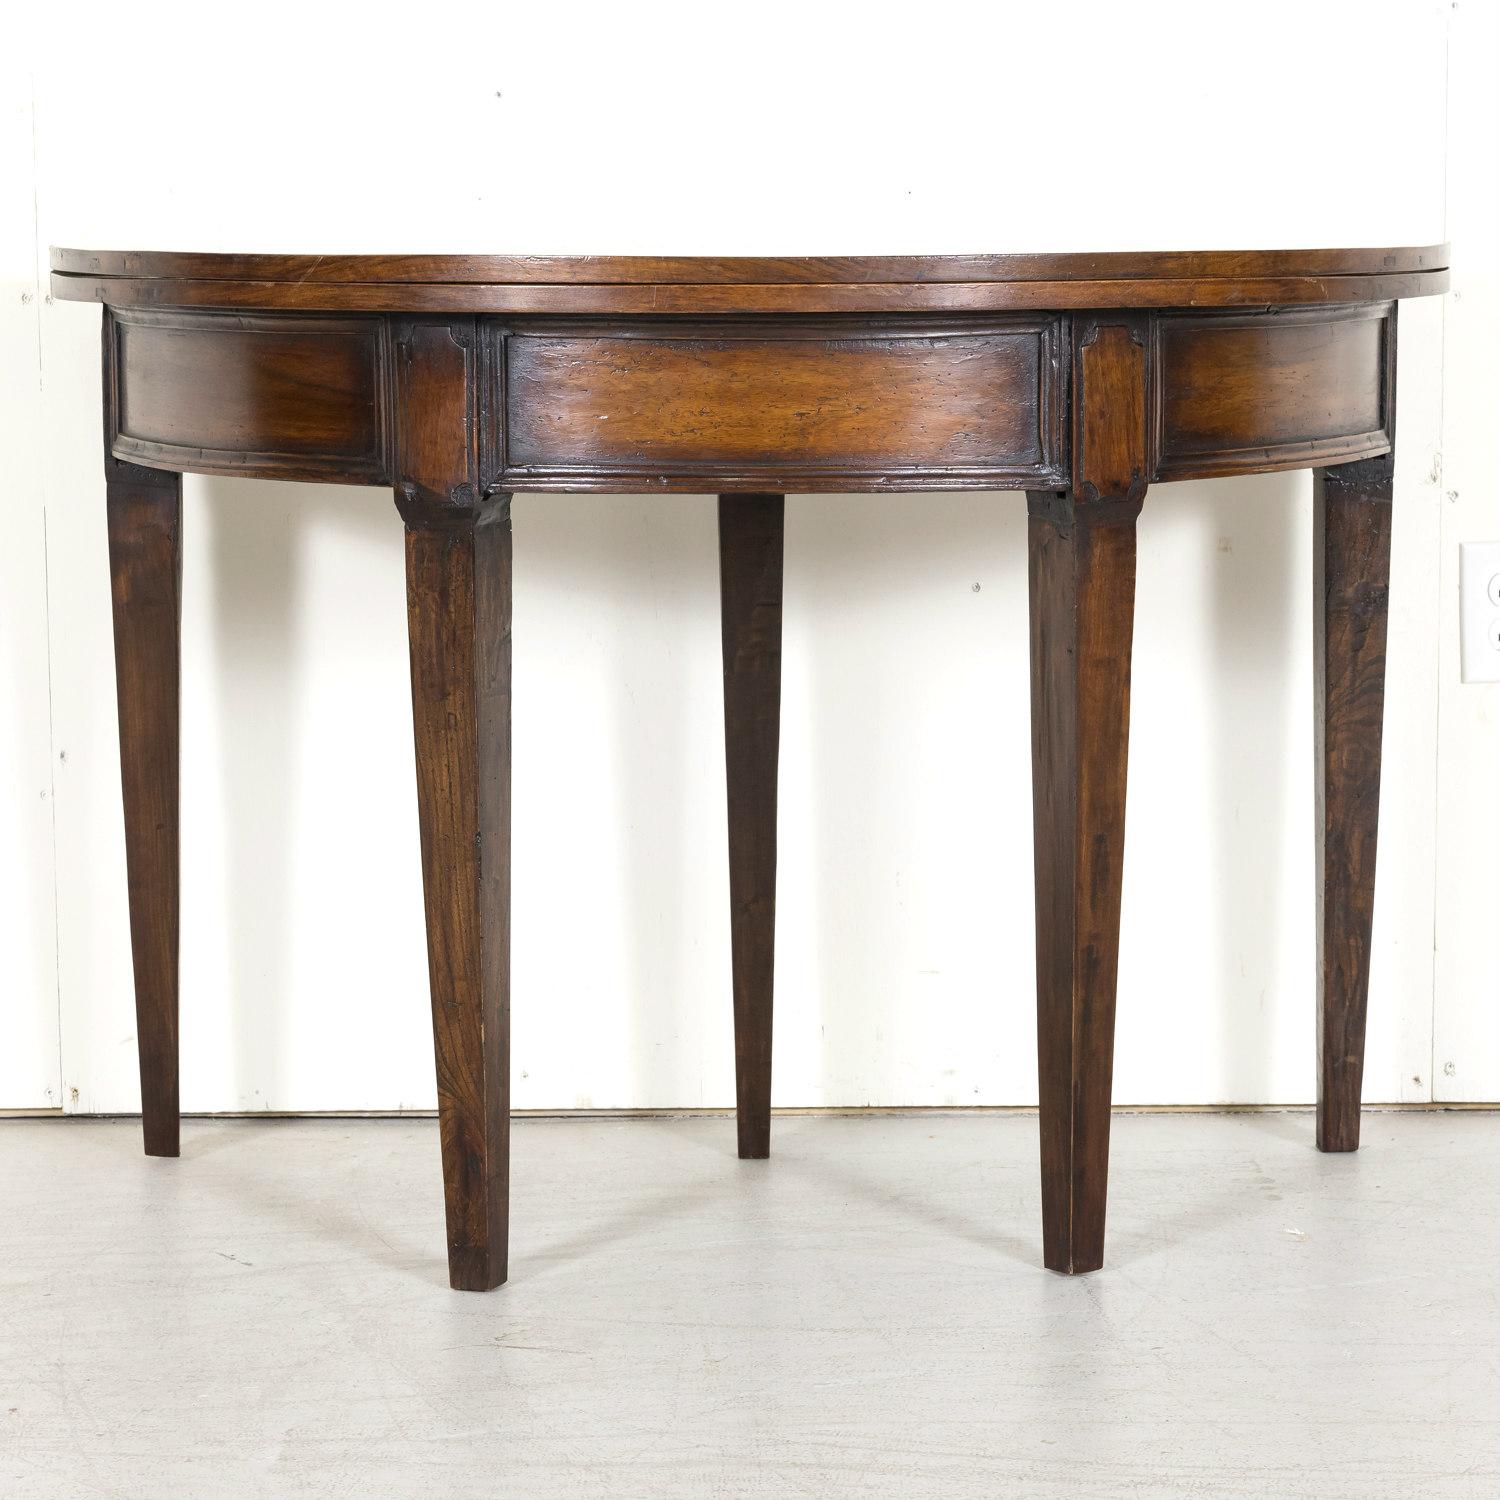 19th Century French Louis XVI Style Walnut Demilune Wall Console or Side Table In Good Condition For Sale In Birmingham, AL